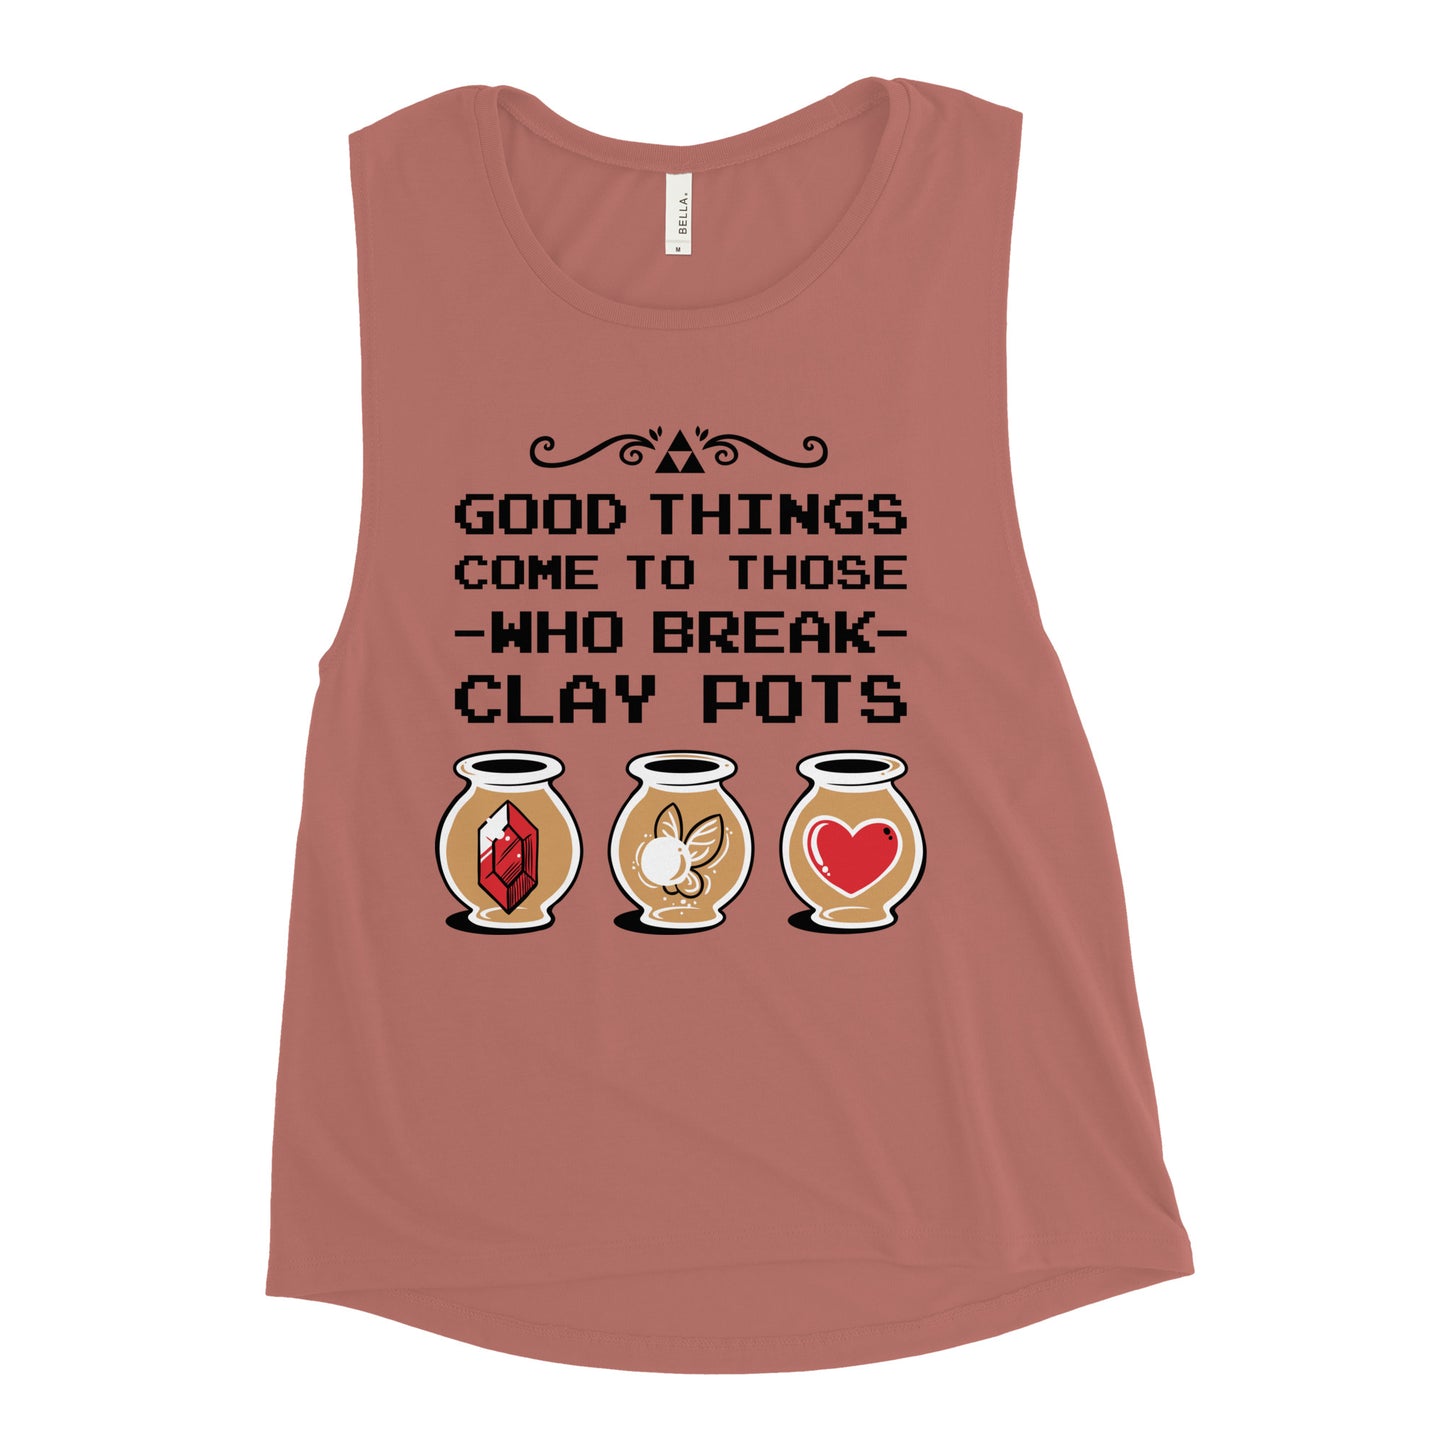 Good Things Come To Those Who Break Clay Pots Women's Muscle Tank